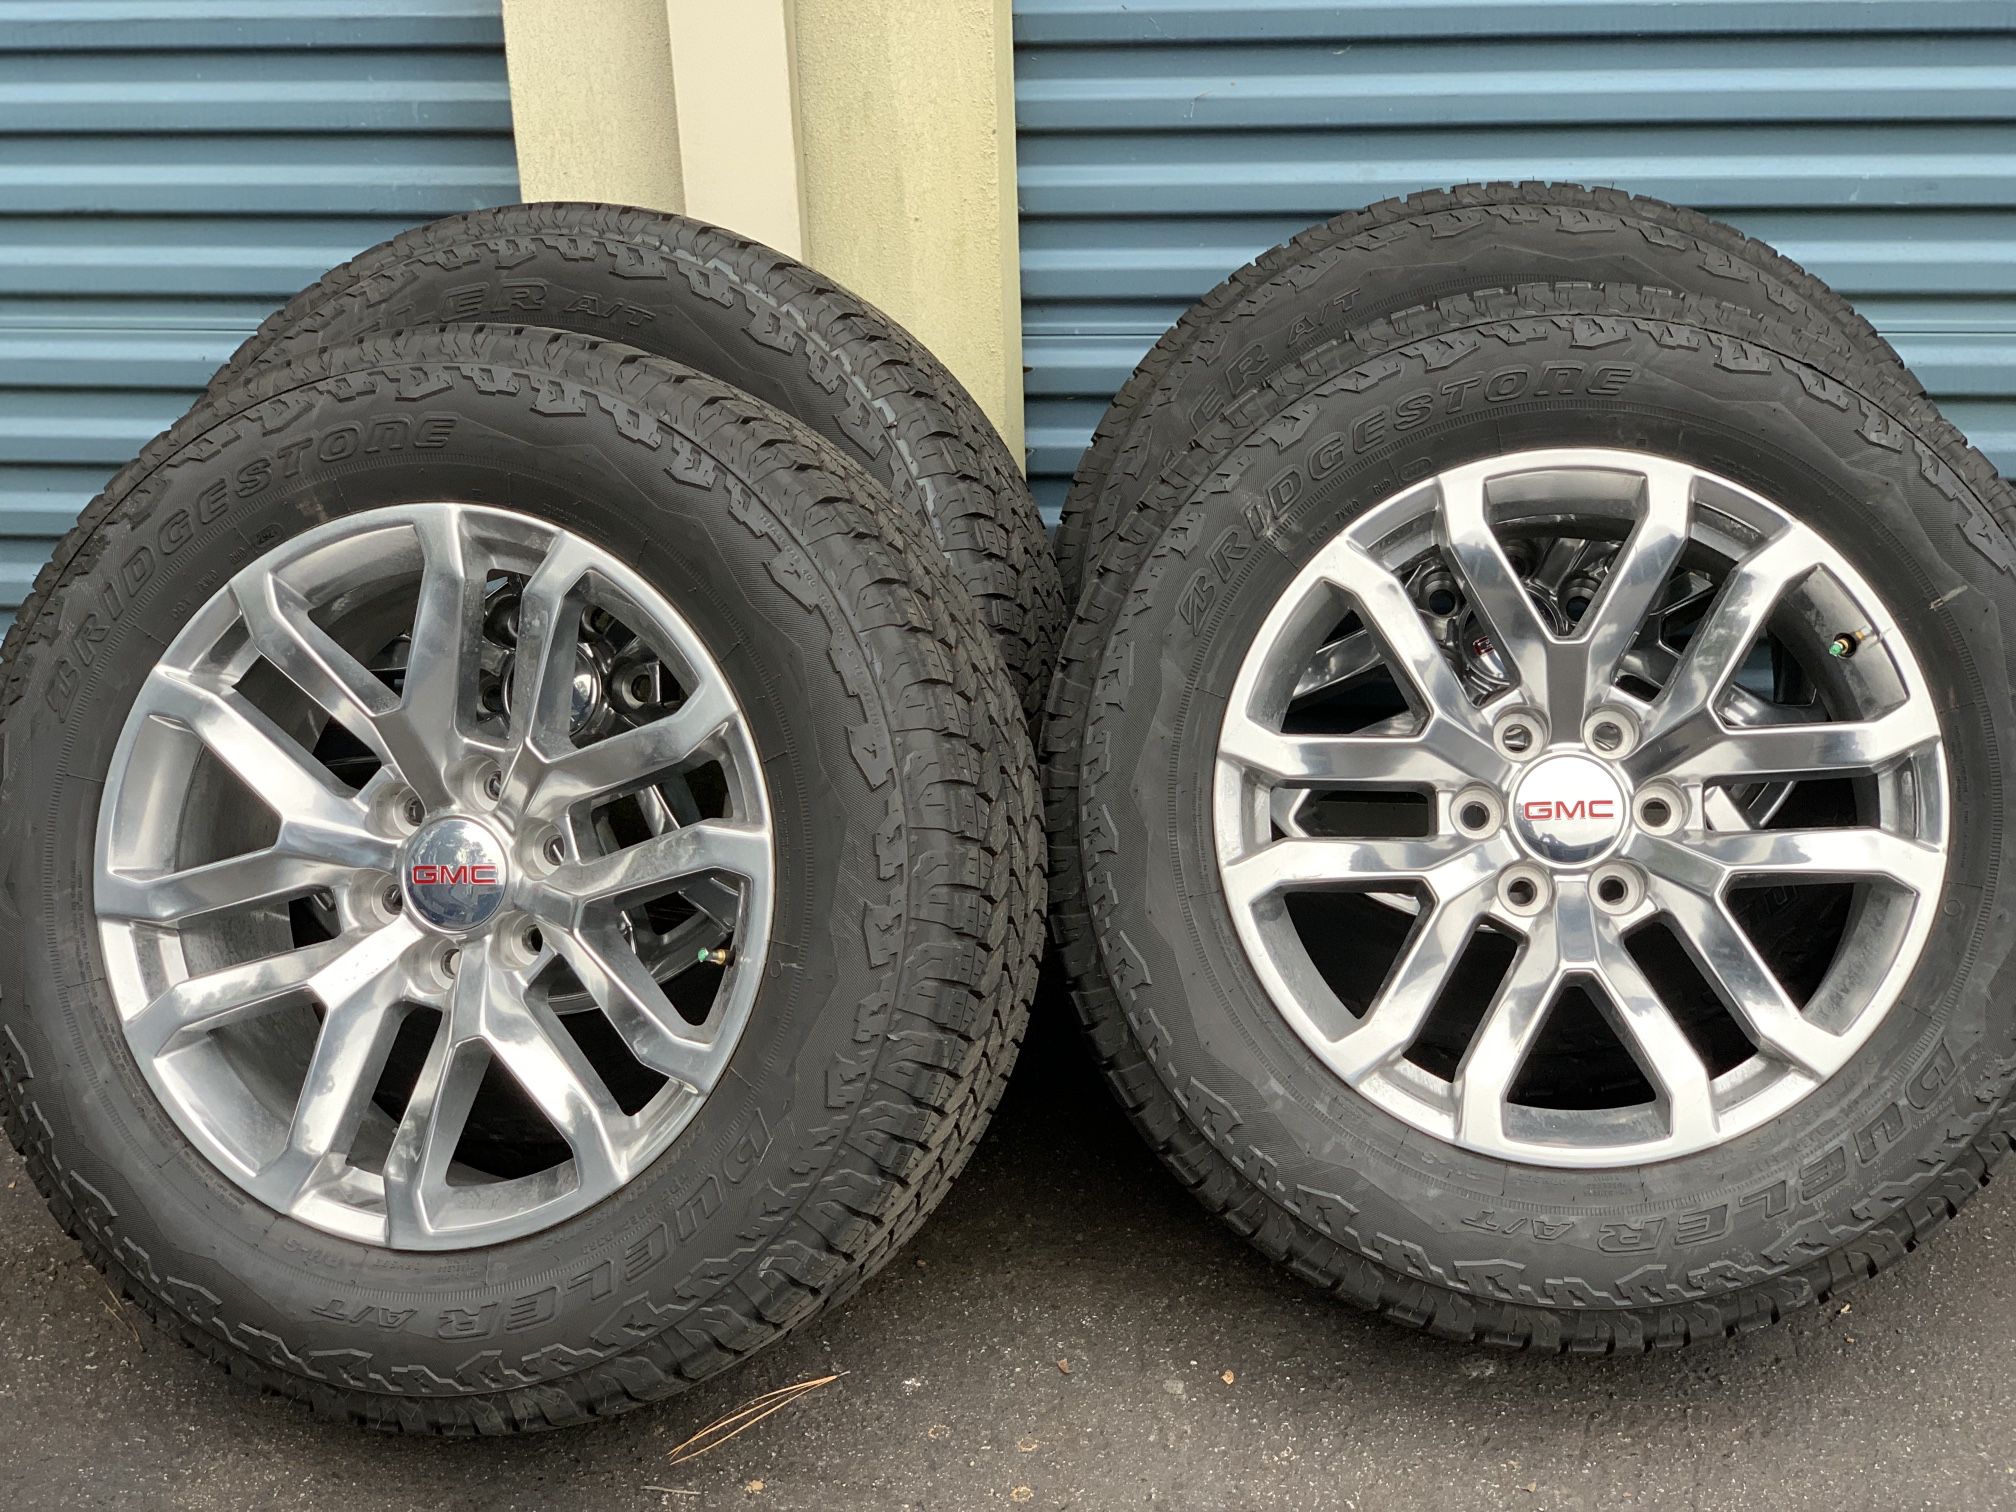 SET OF WHEELS AND TIRES 20”